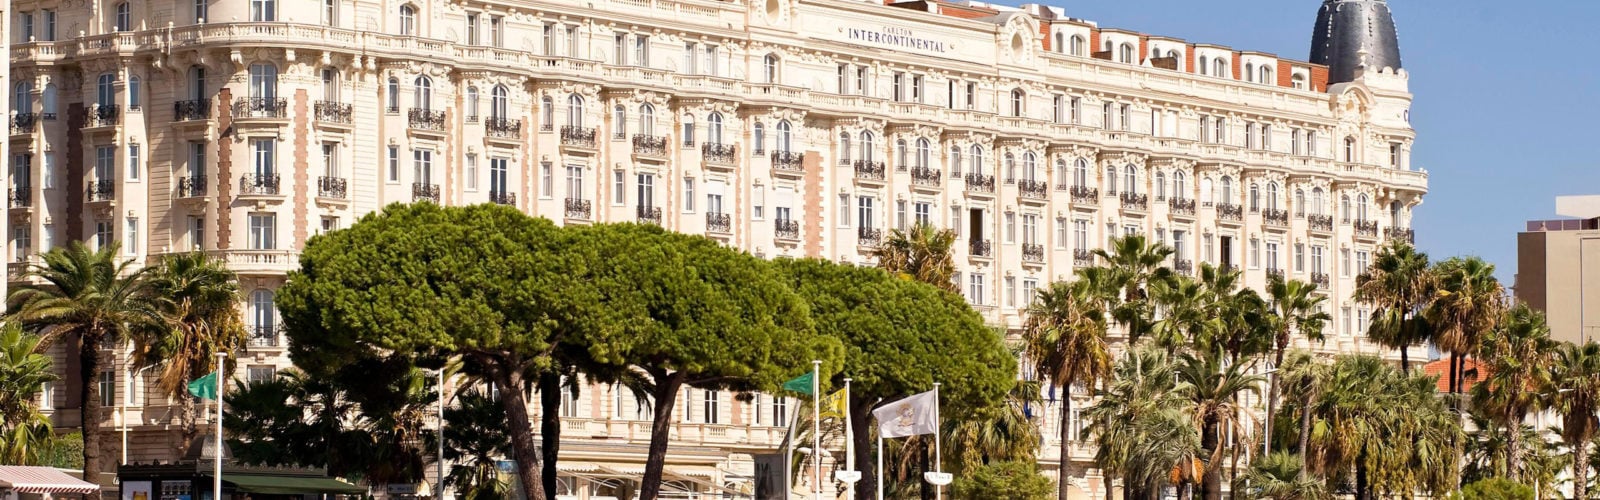 intercontinental-cannes-exterior-france